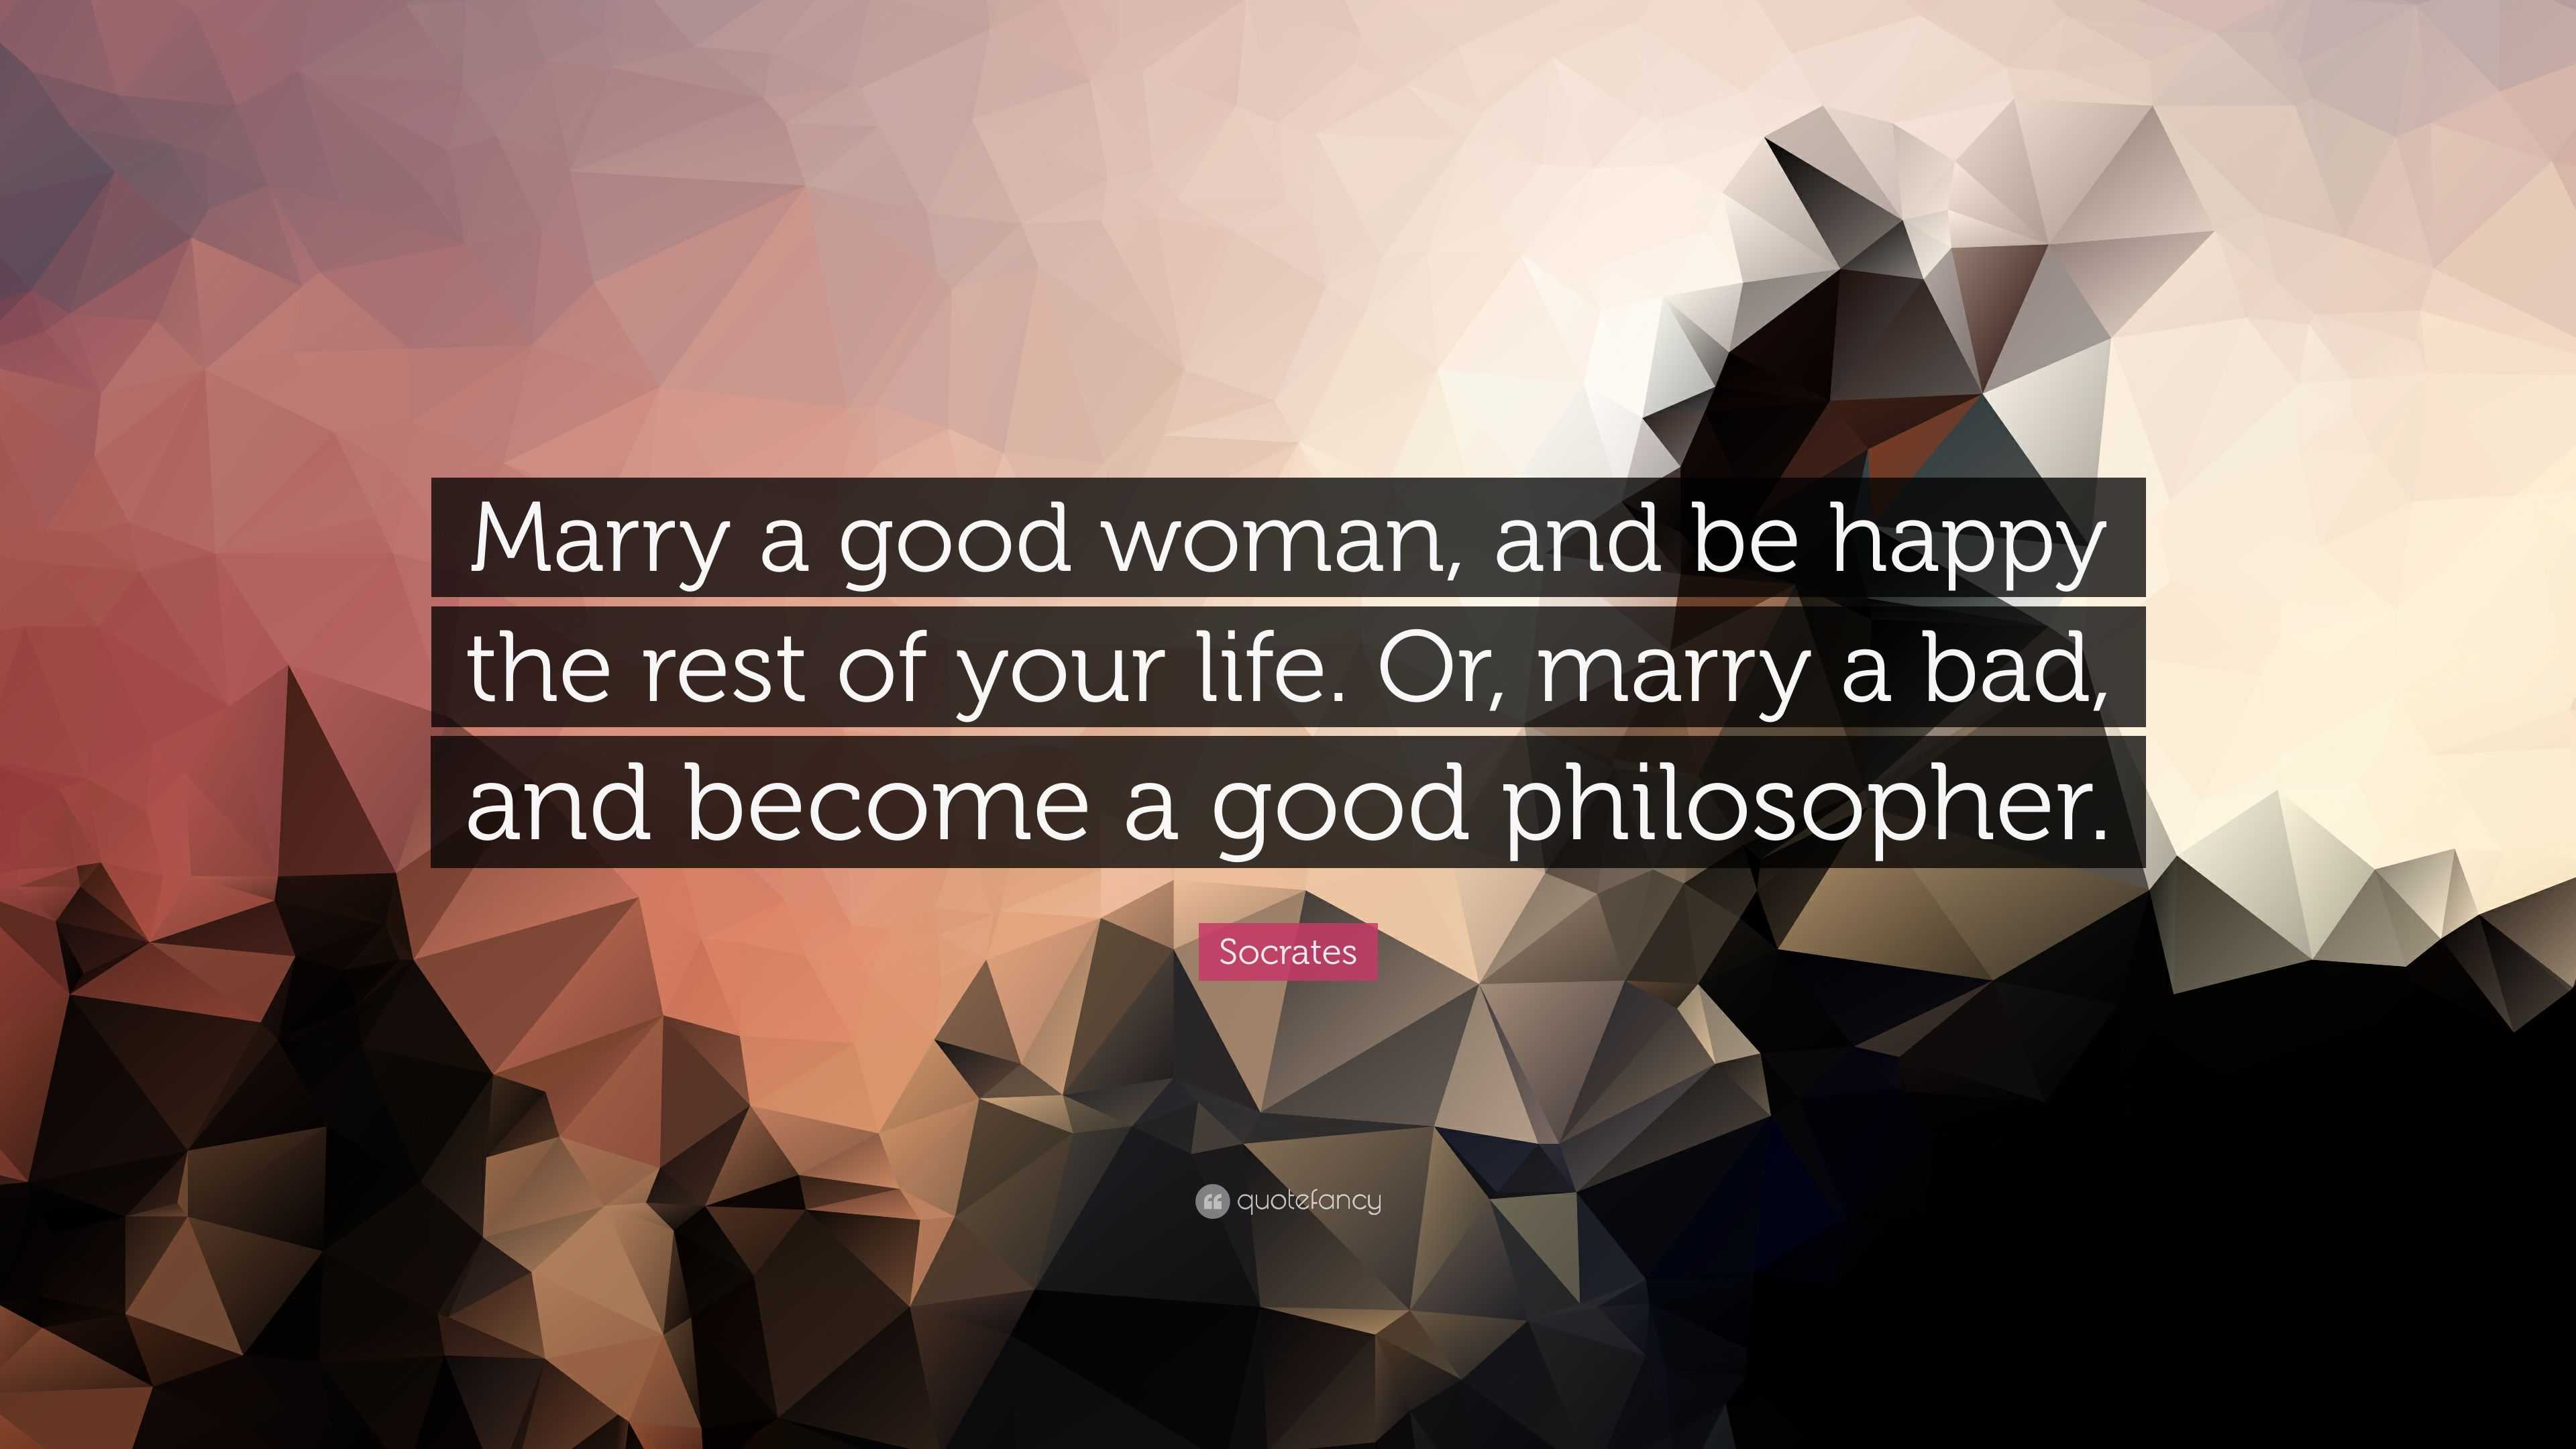 Socrates Quote “Marry a good woman and be happy the rest of your